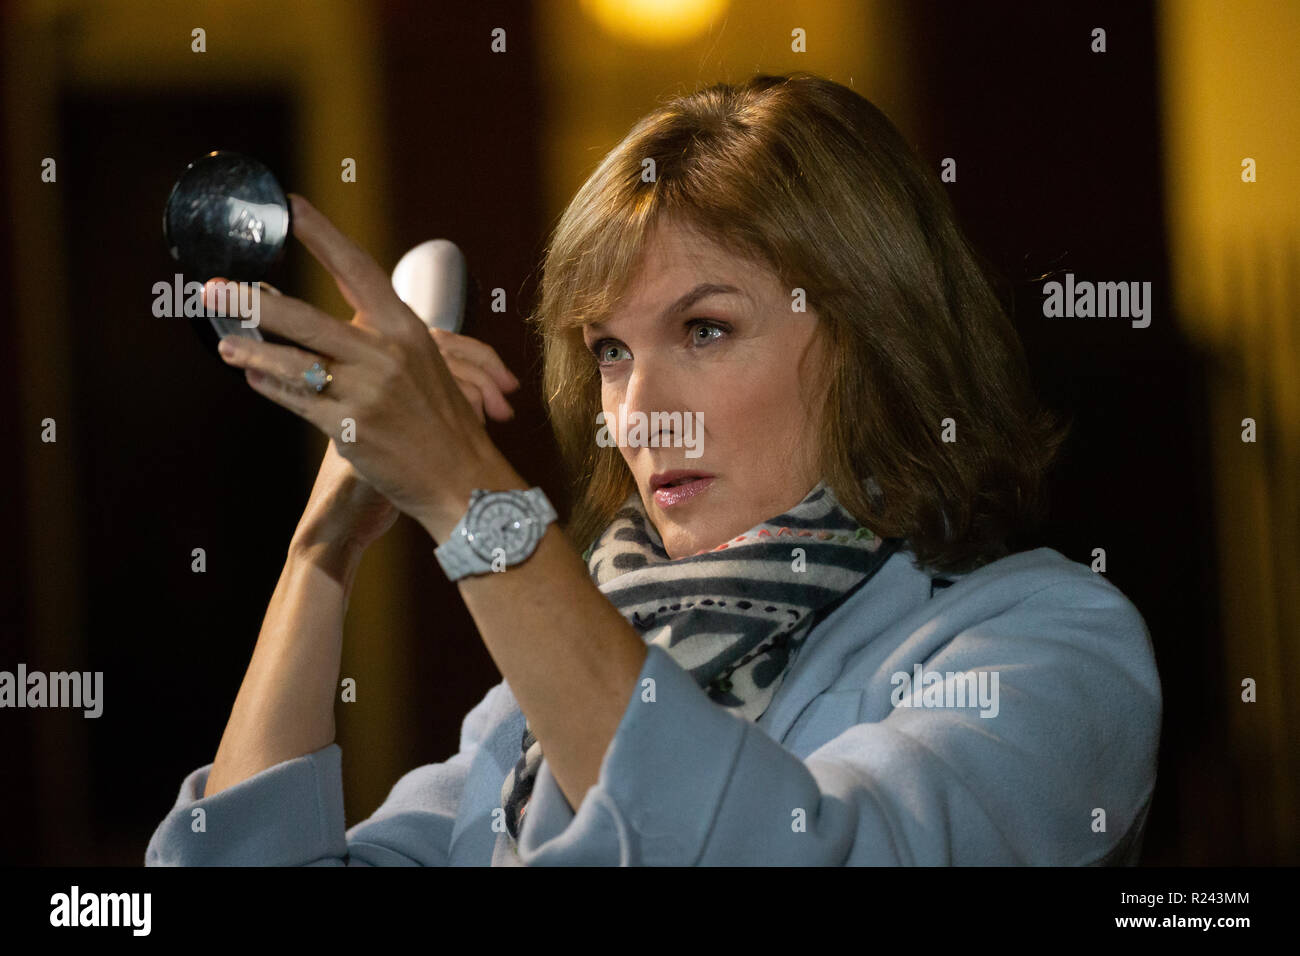 Journalist, newsreader and television presenter, Fiona Bruce, reporting for the BBC from Downing Street about the latest Brexit developments. Stock Photo